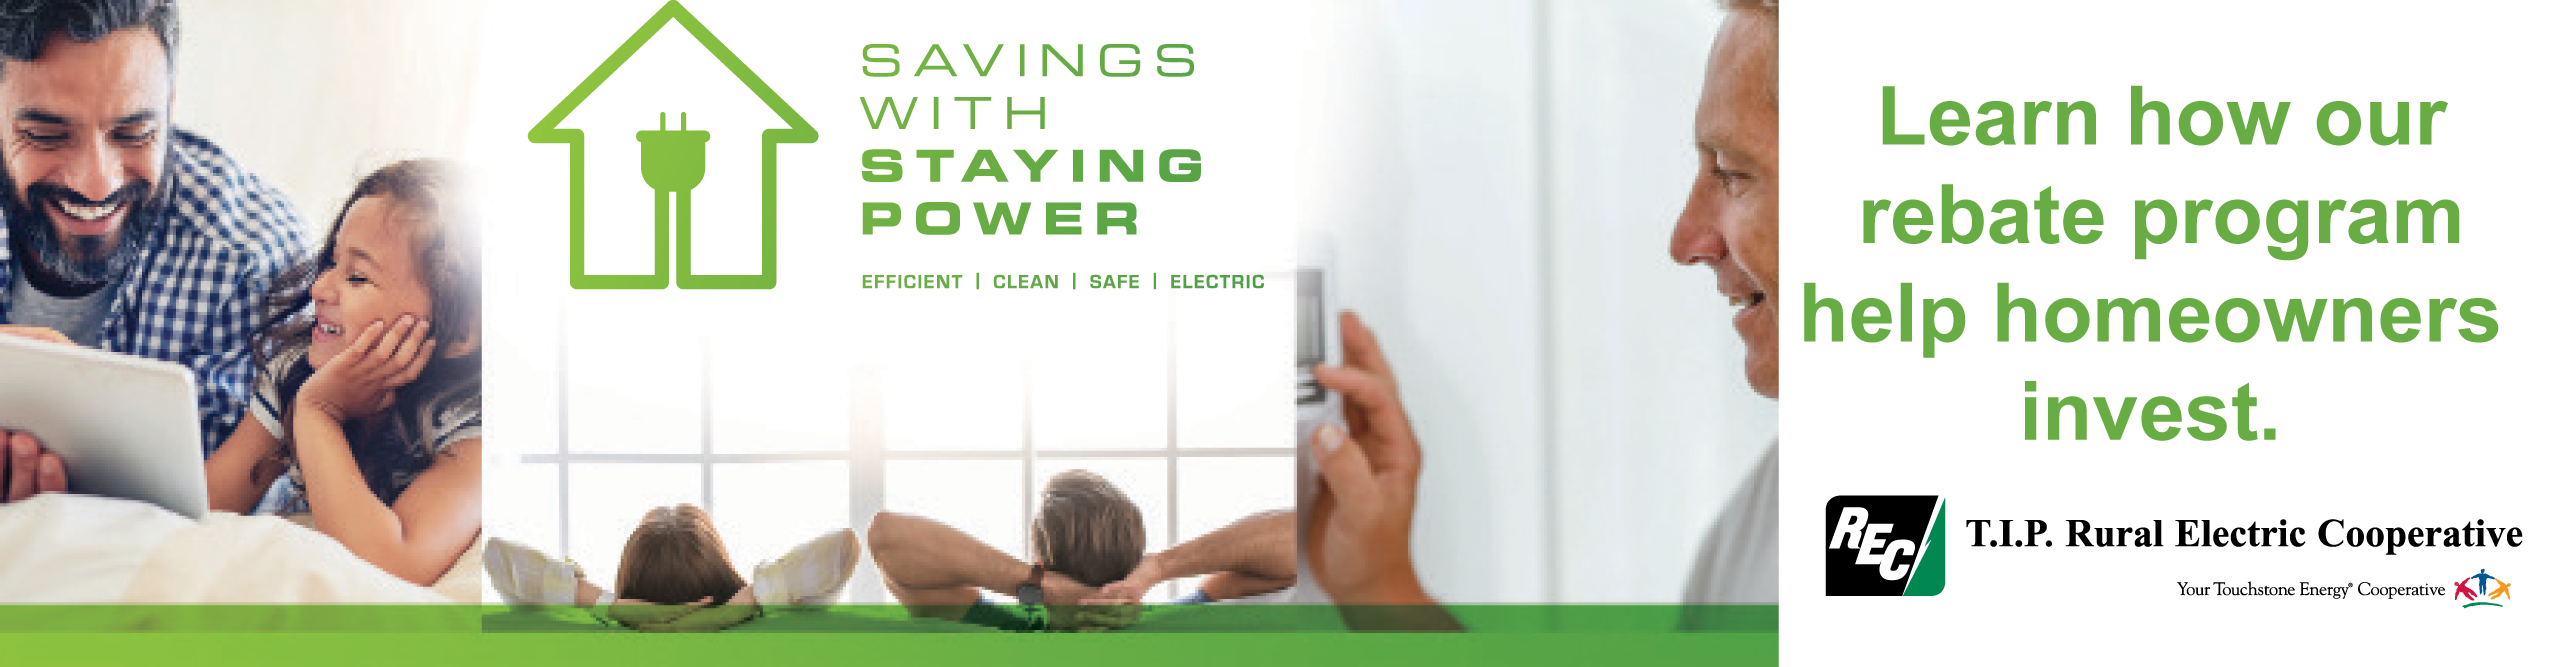 Savings with staying power